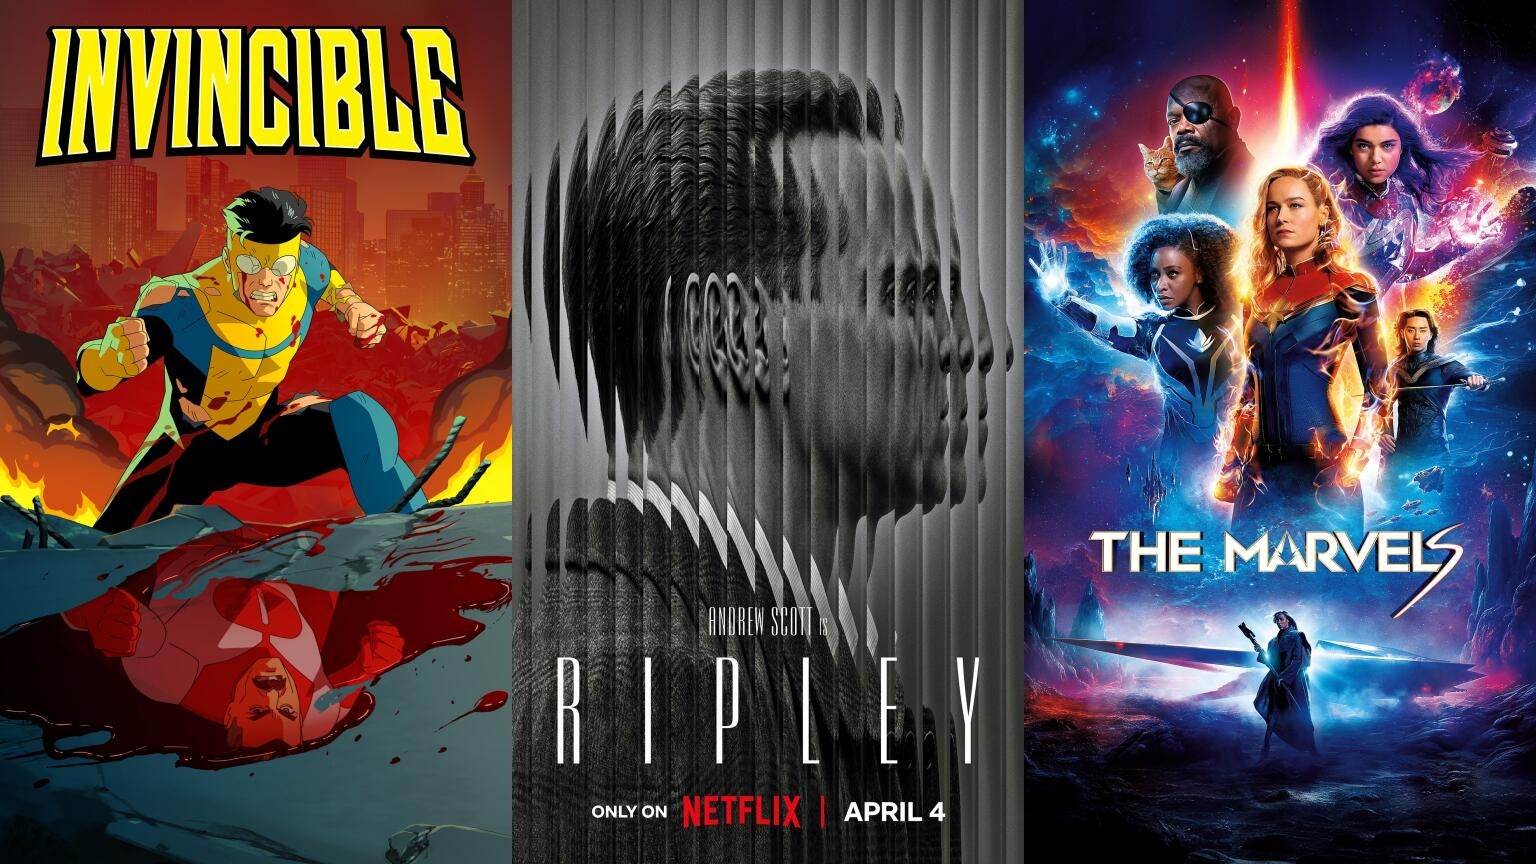 Posters for "Invincible," "Ripley," and "The Marvels"